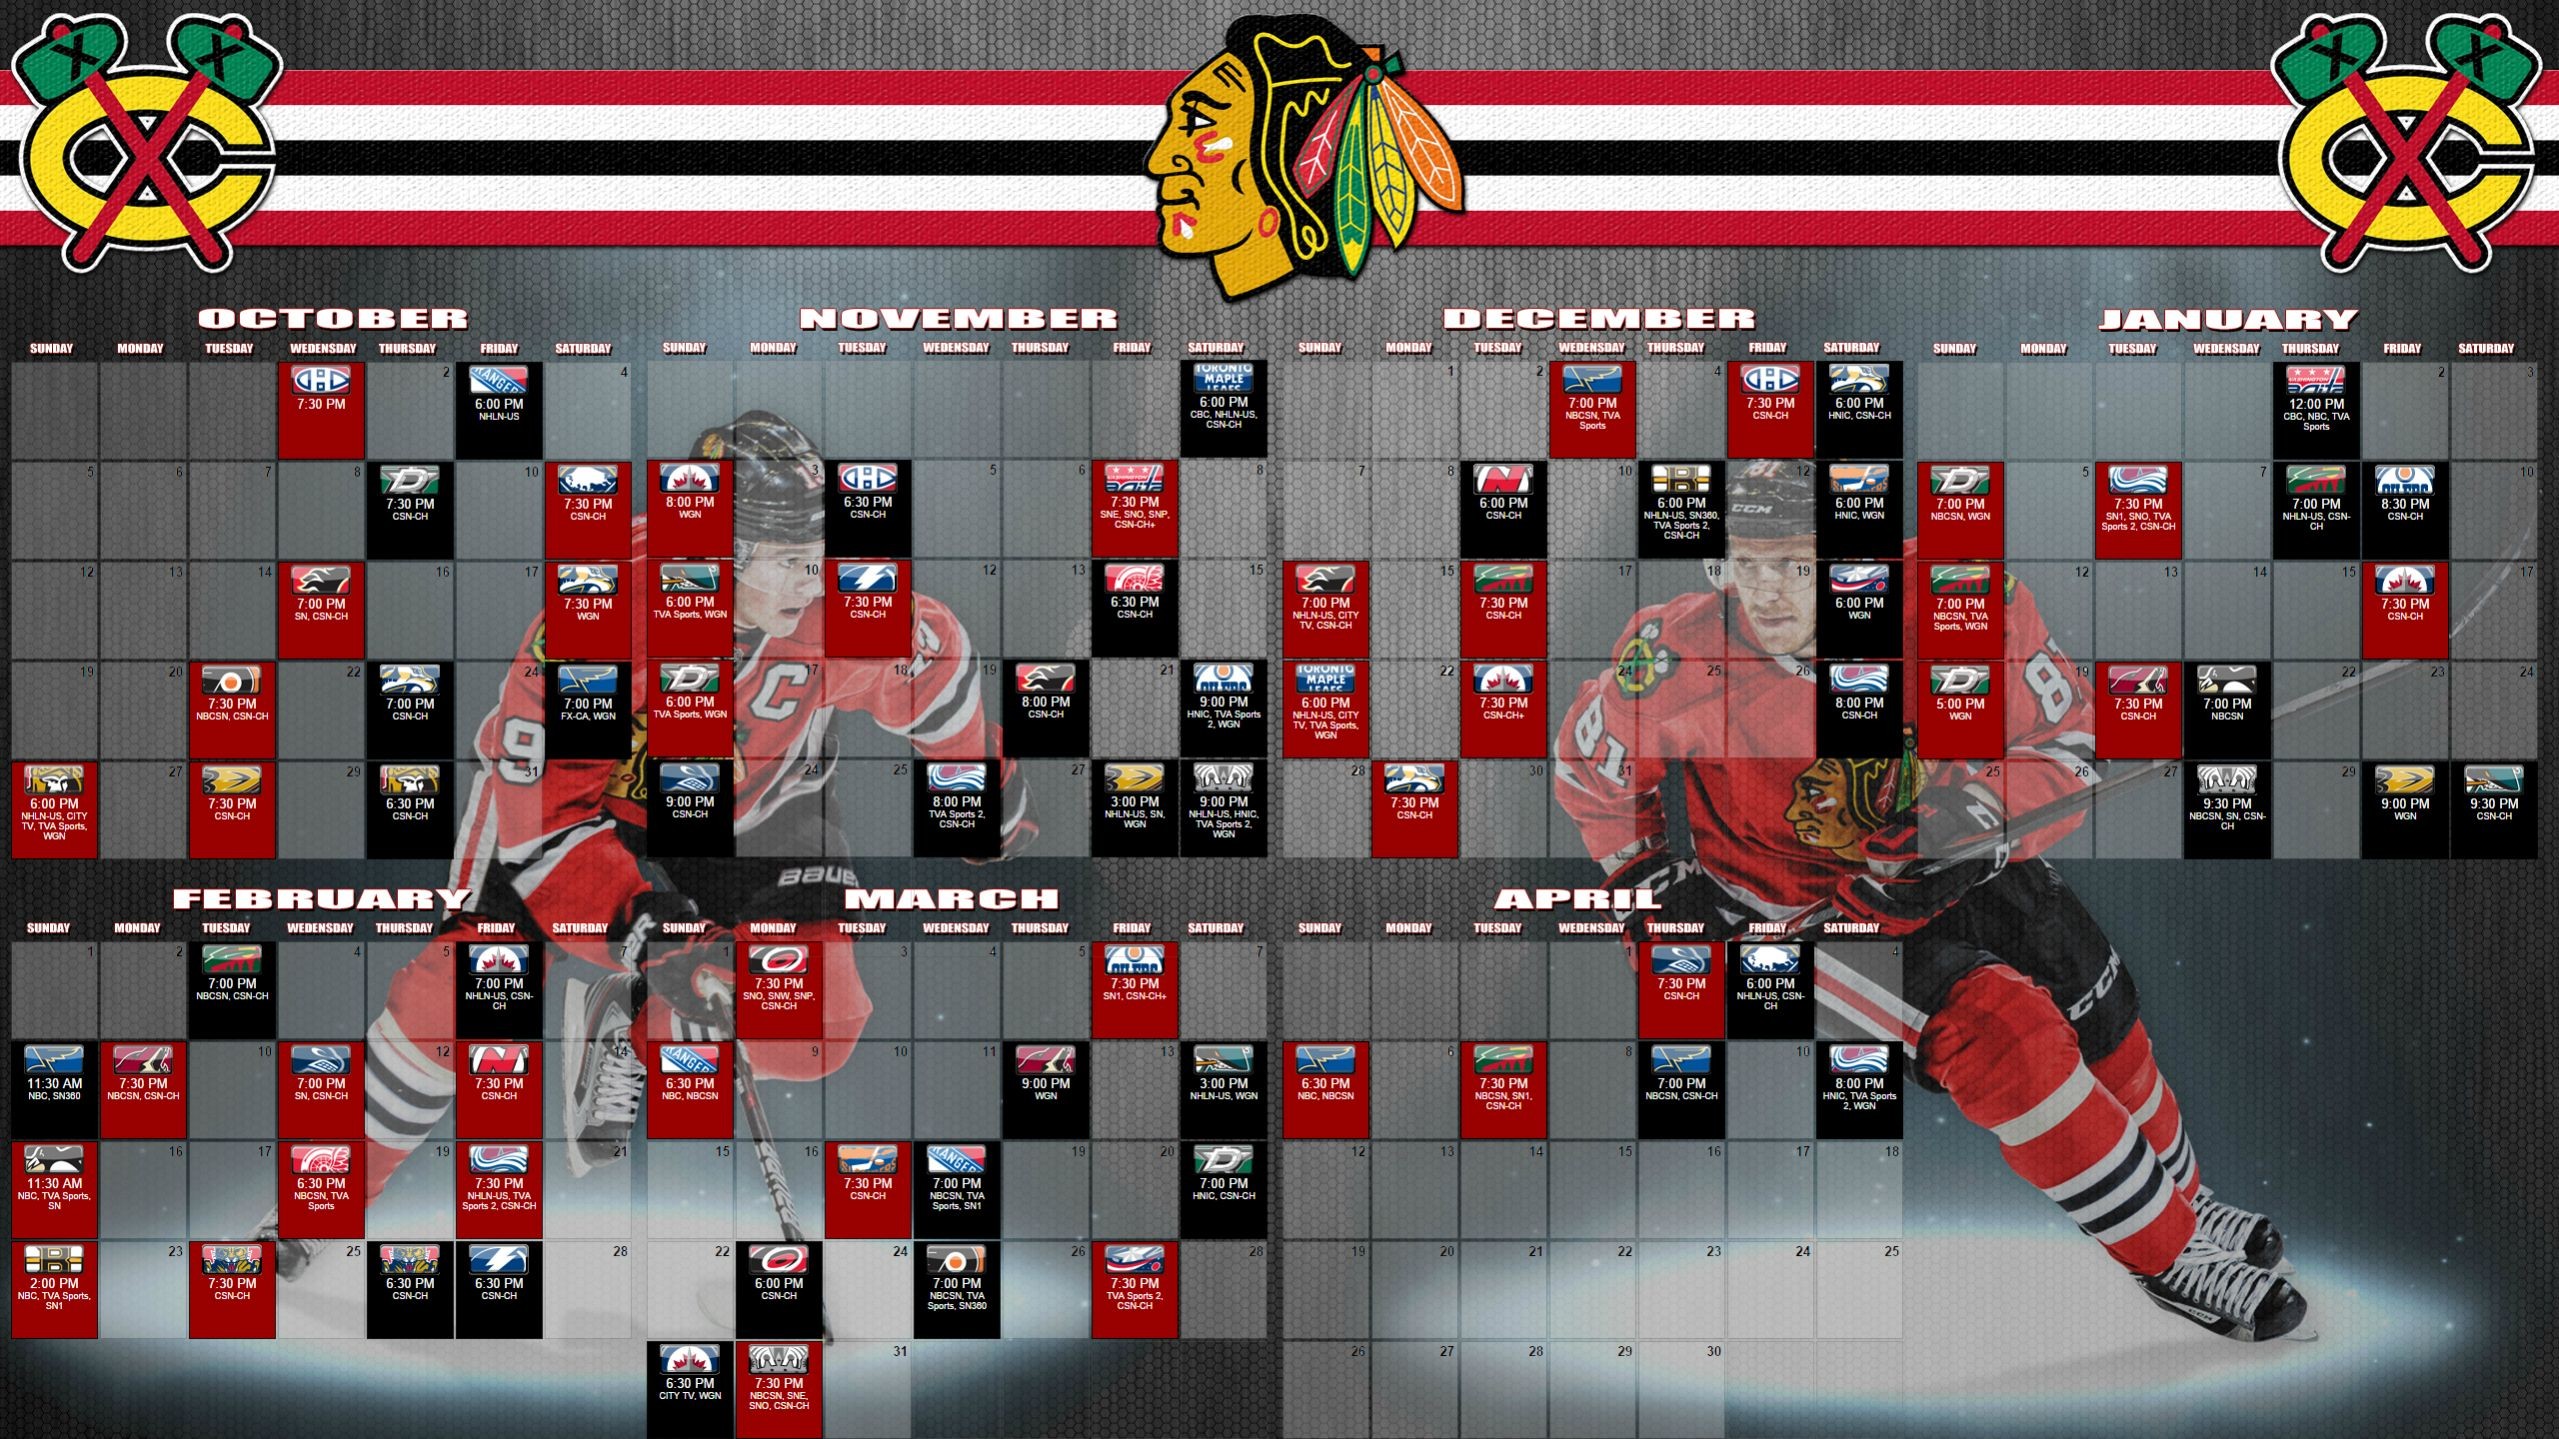 Blackhawks wallpaper ·① Download free cool full HD wallpapers for